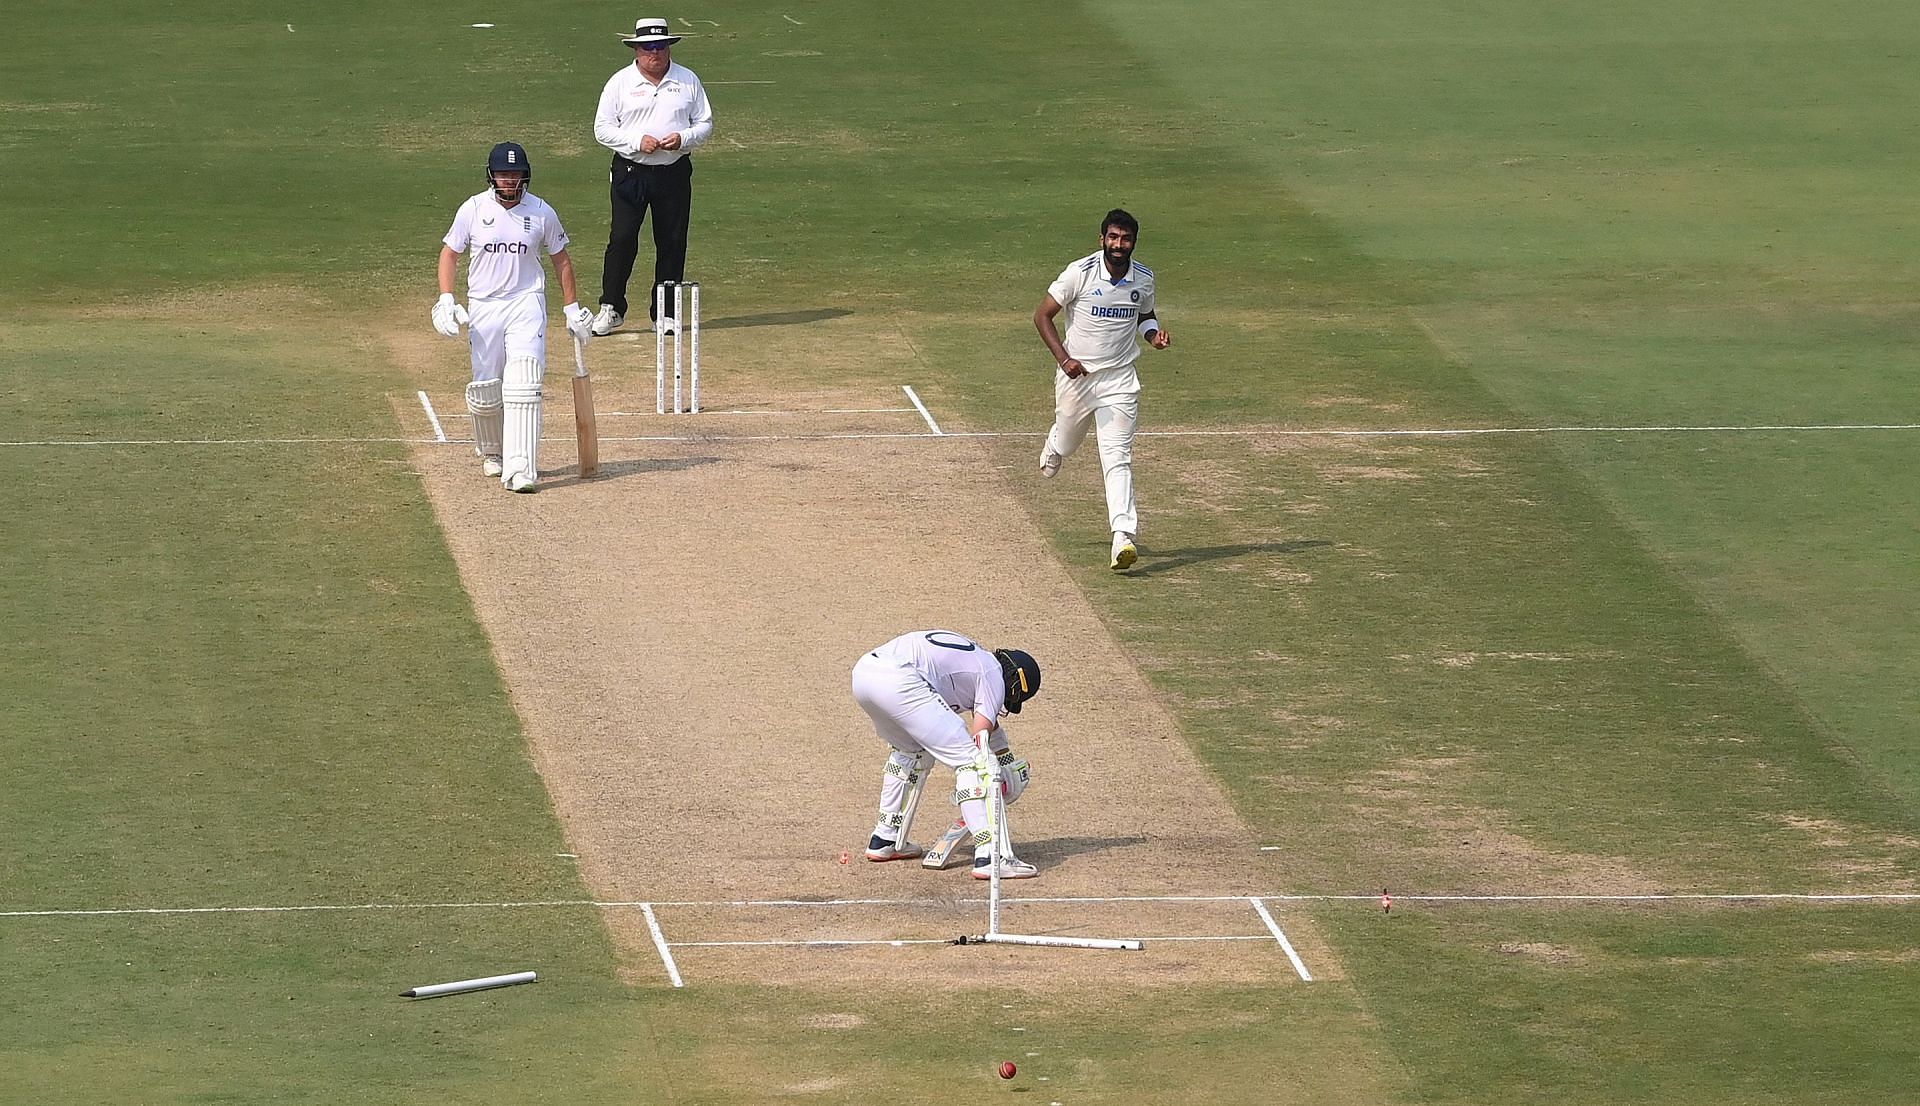 Jasprit Bumrah bowled a sensational yorker to castle Ollie Pope in the first innings. [P/C: Getty]